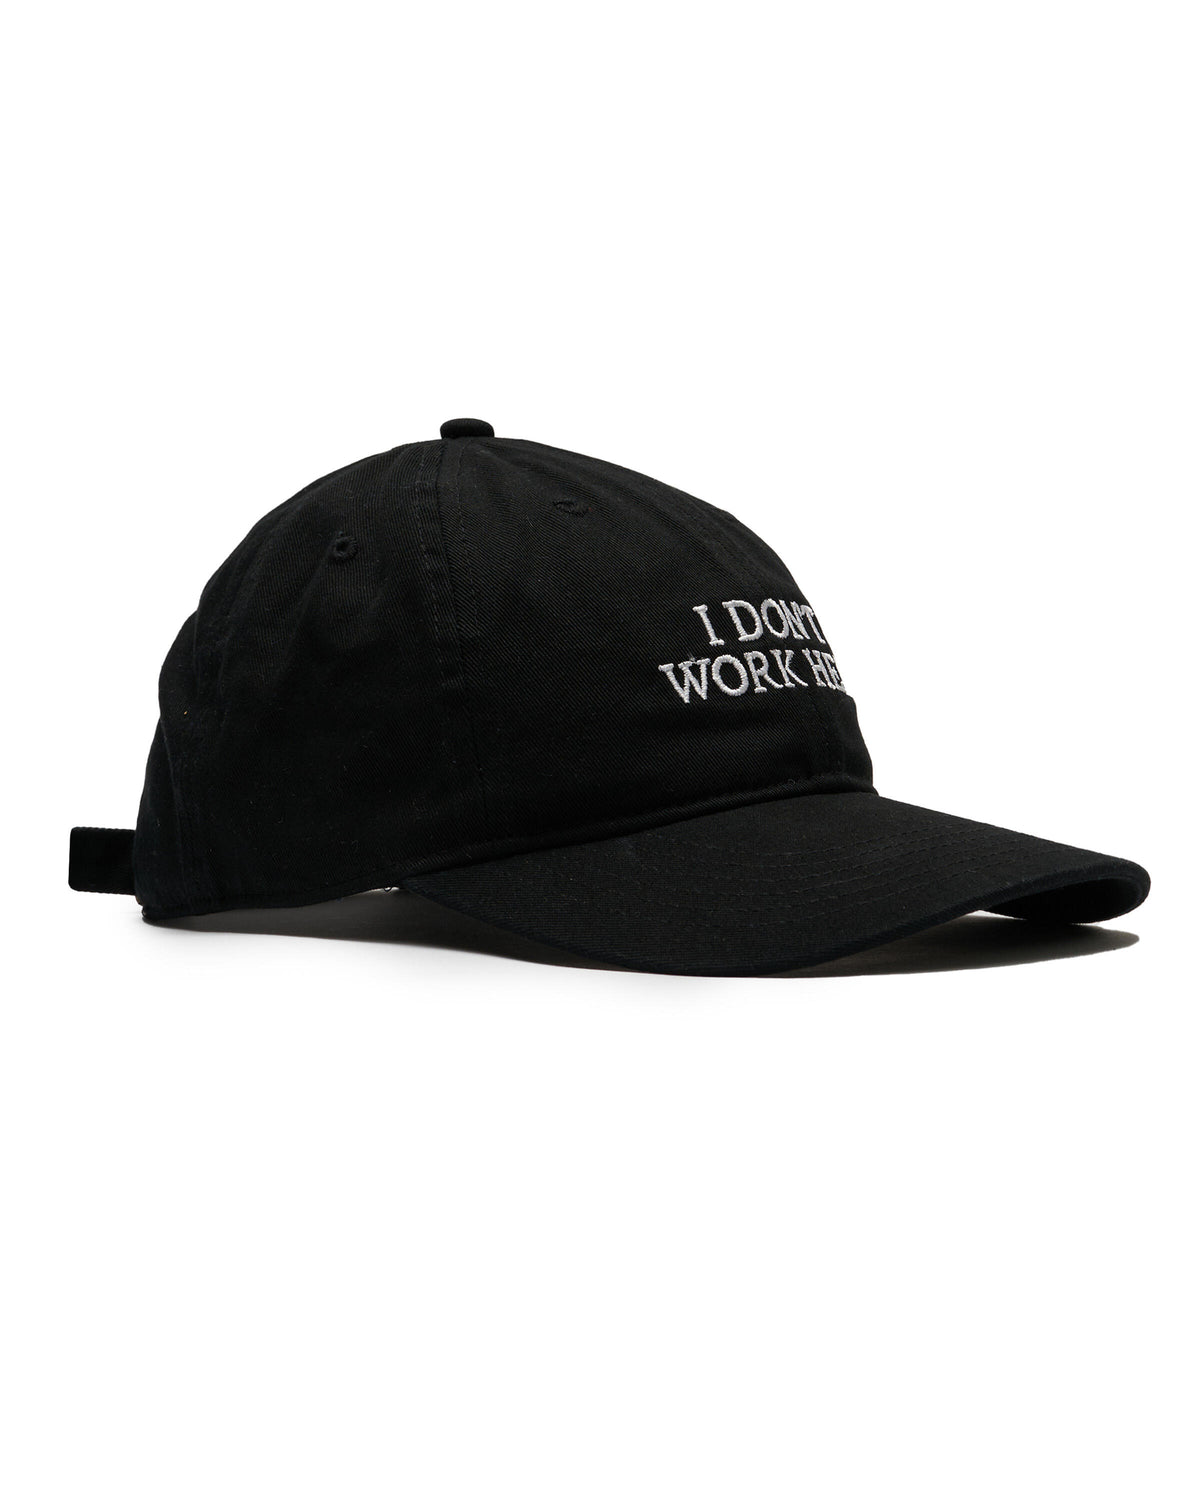 IDEA SORRY I DON'T WORK HERE HAT